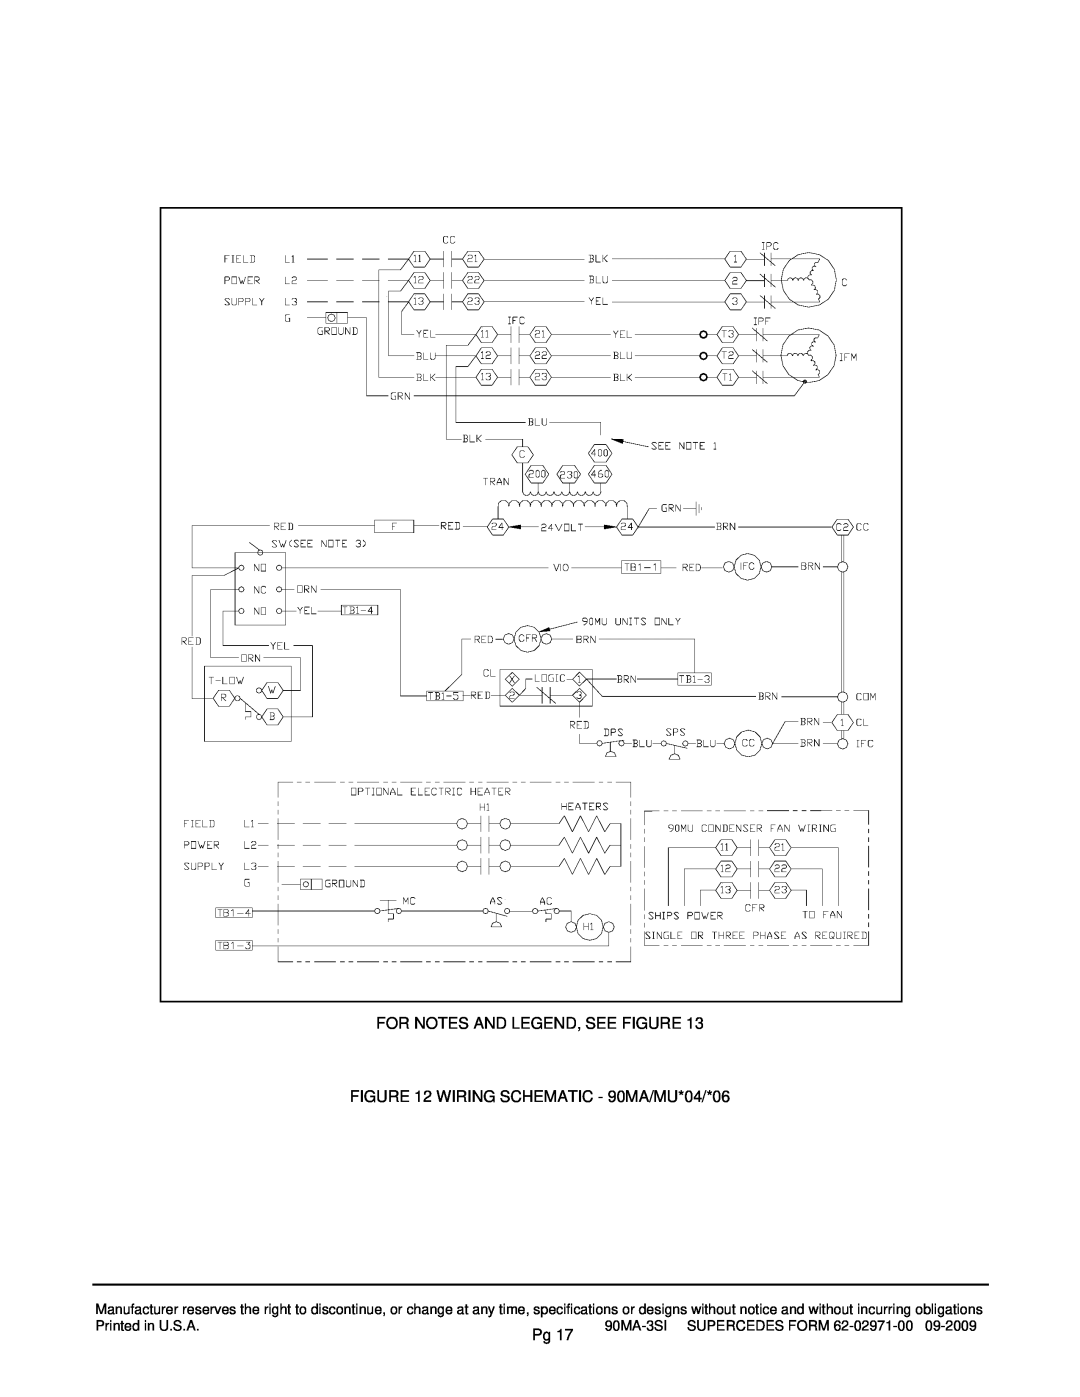 Carrier 90MU specifications For Notes And Legend, See Figure, WIRING SCHEMATIC - 90MA/MU*04/*06, 90MA-3SISUPERCEDES FORM 